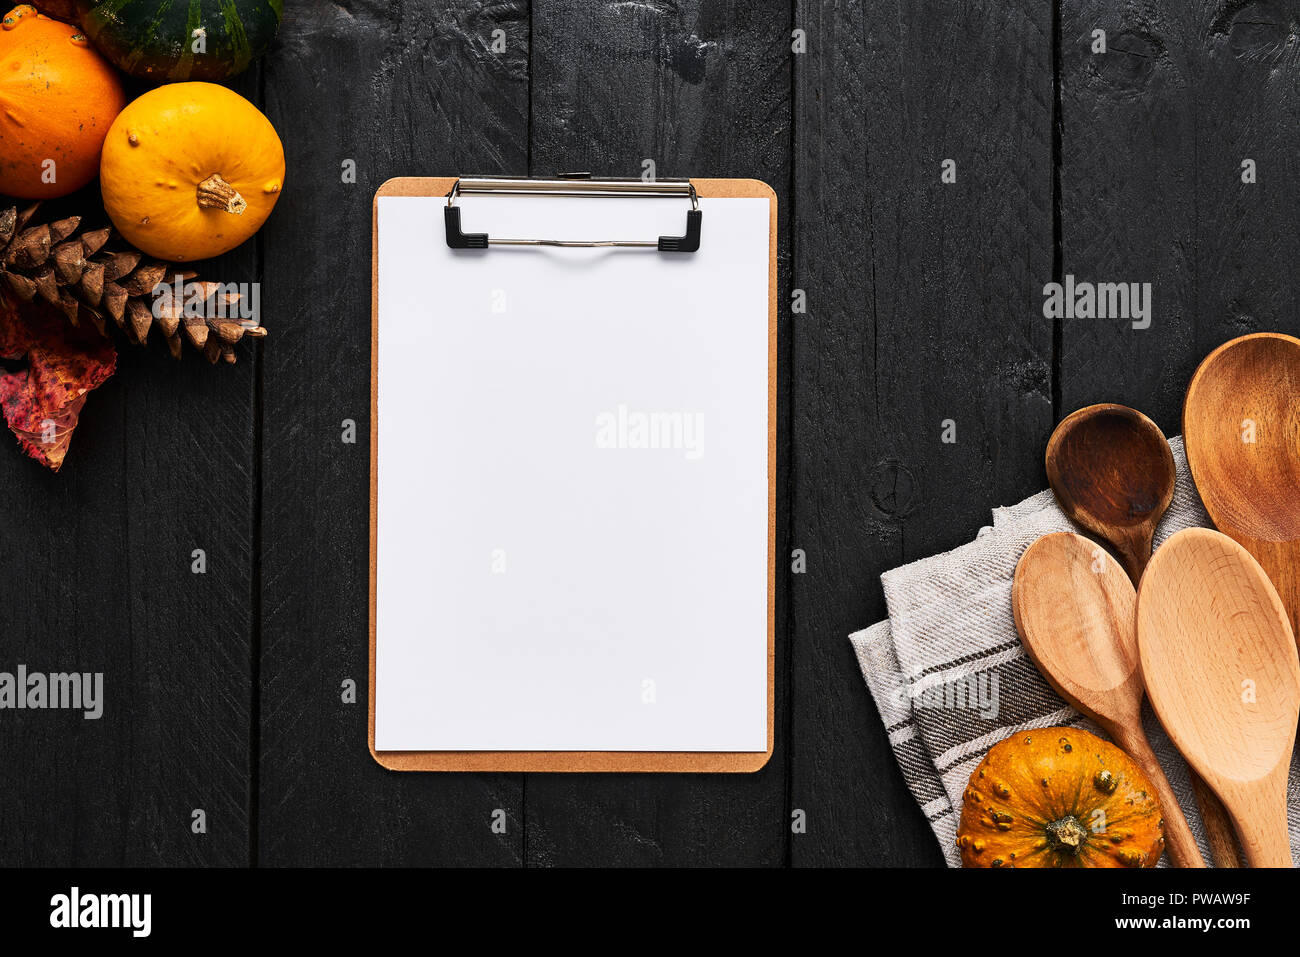 Autumn vegetables cooking preparation. Pumpkins, wooden spoons and blank paper on cardboard clipboard for menu or recipes on black wooden background.  Stock Photo